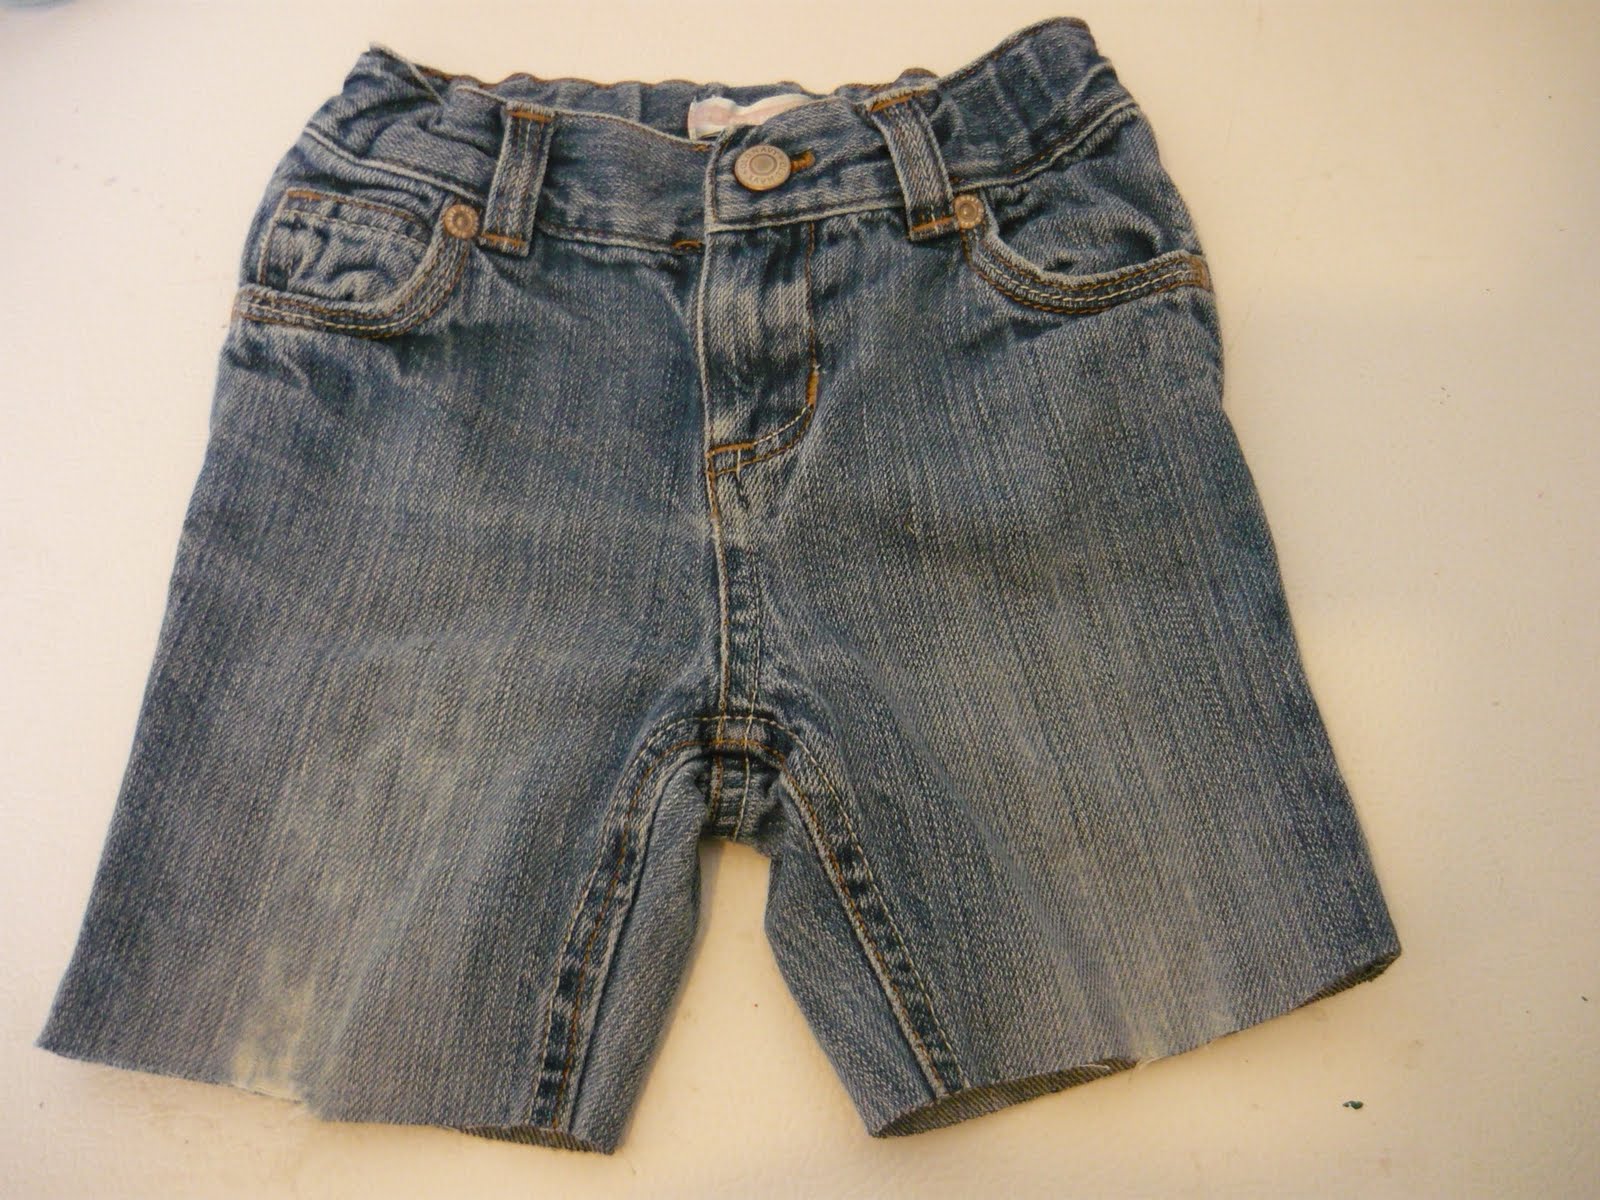 How To Repurpose Jeans Cutoffs Into Patches